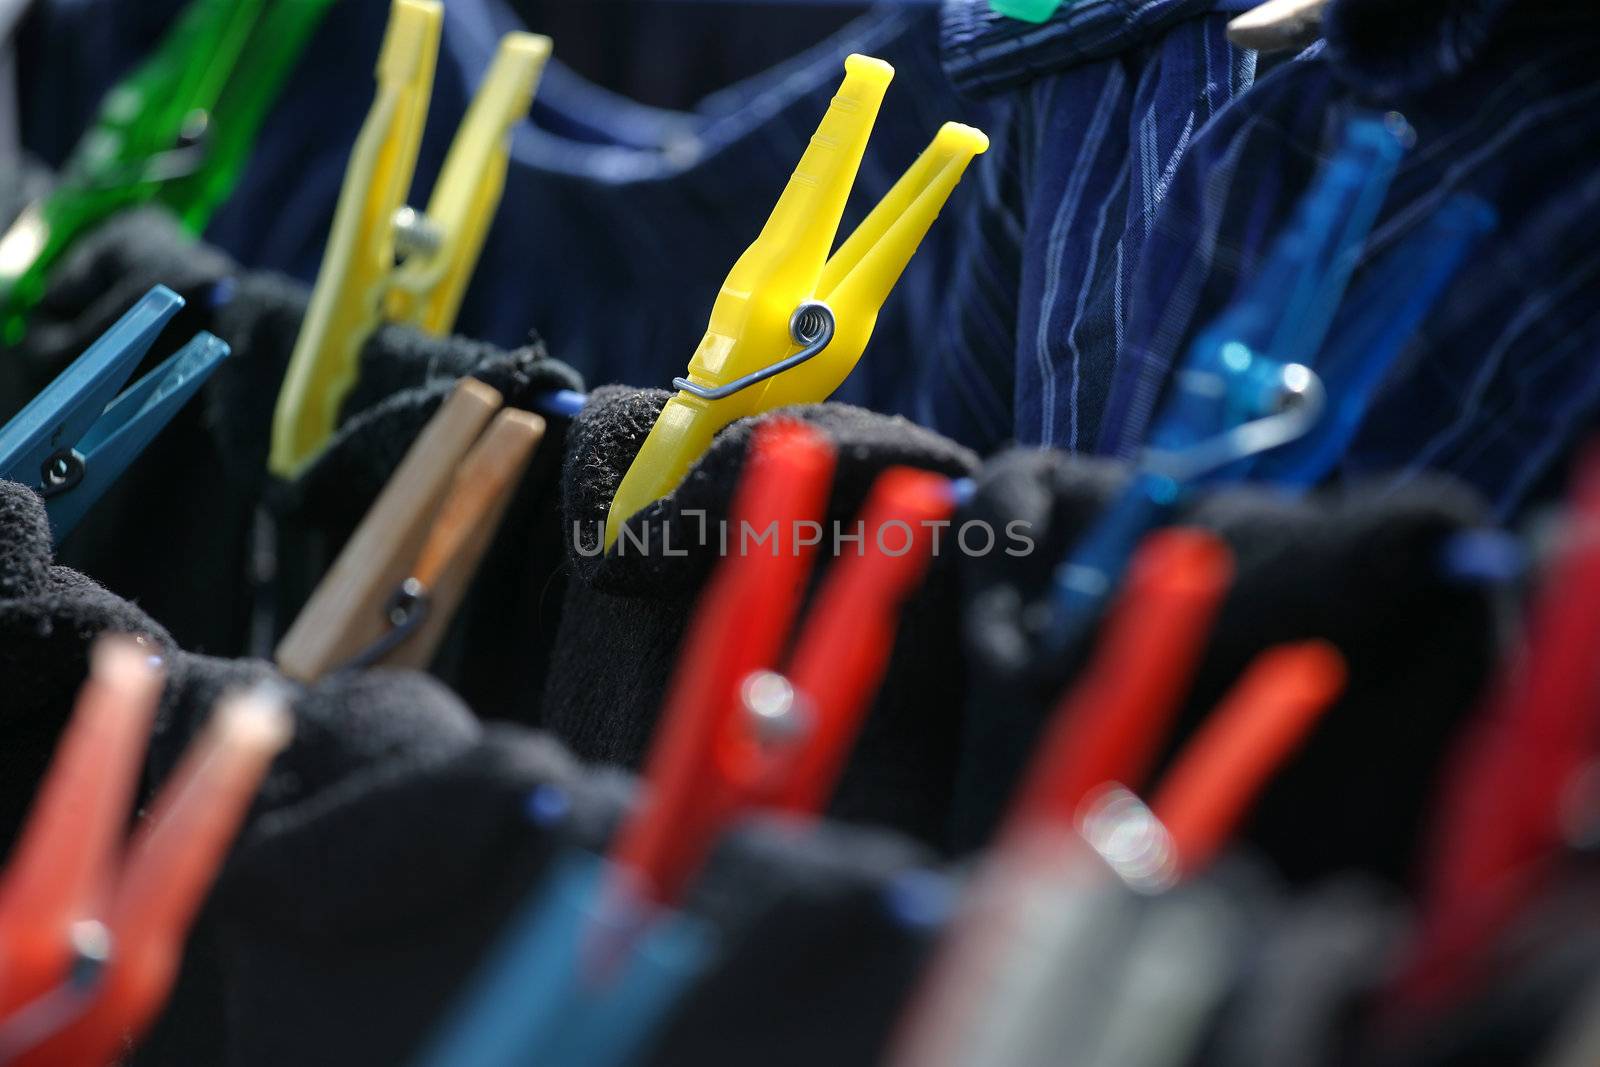 Colourful clothespins hanging dark laundry to dry.
